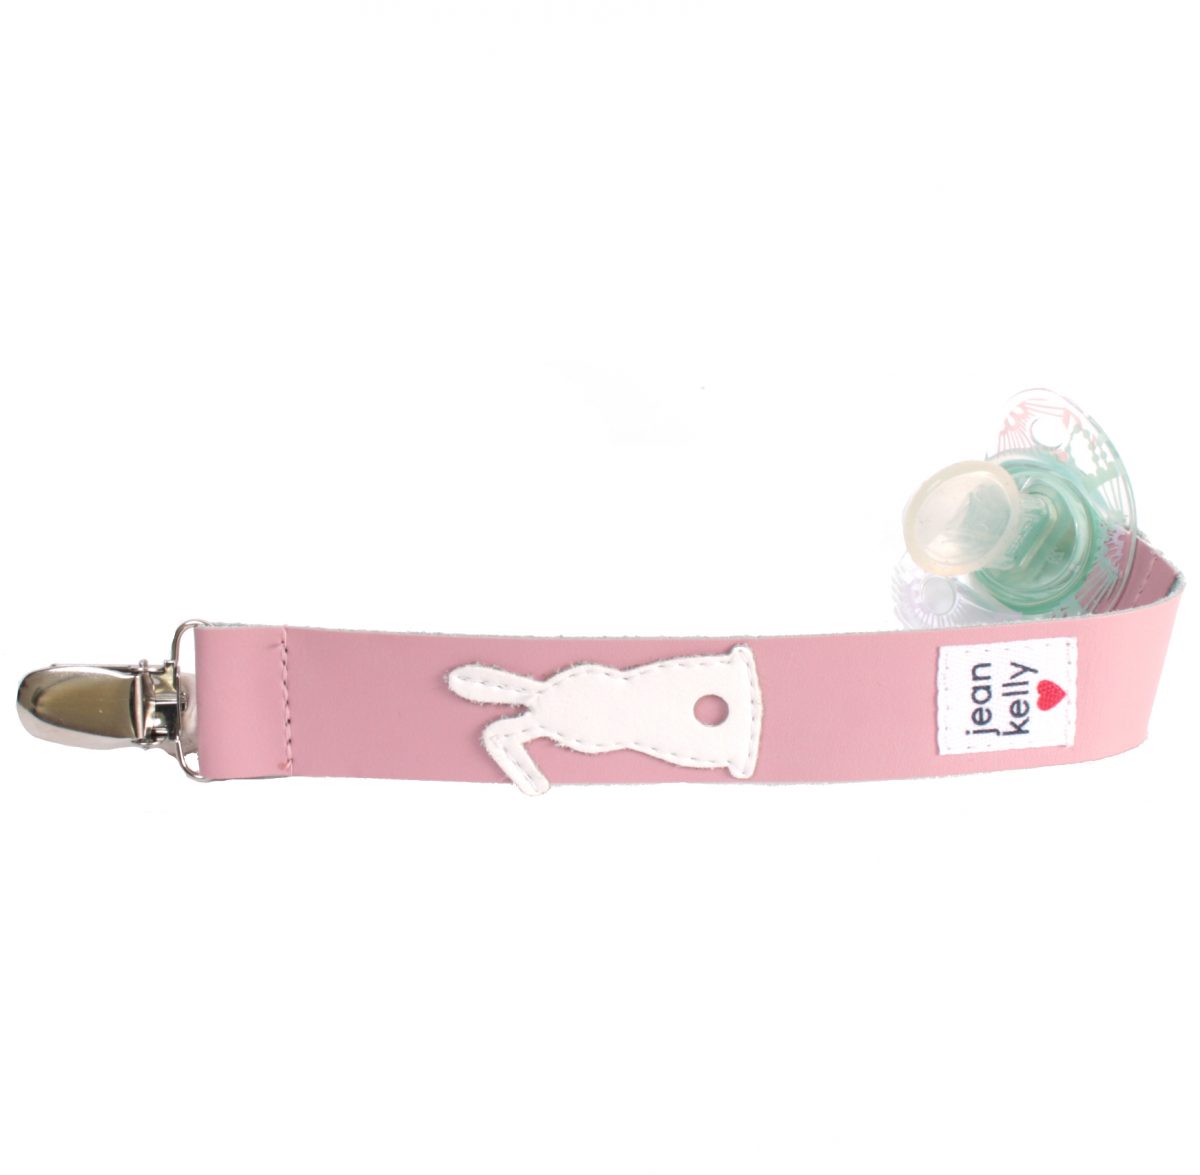 jeankelly_dummy clip pink bunny